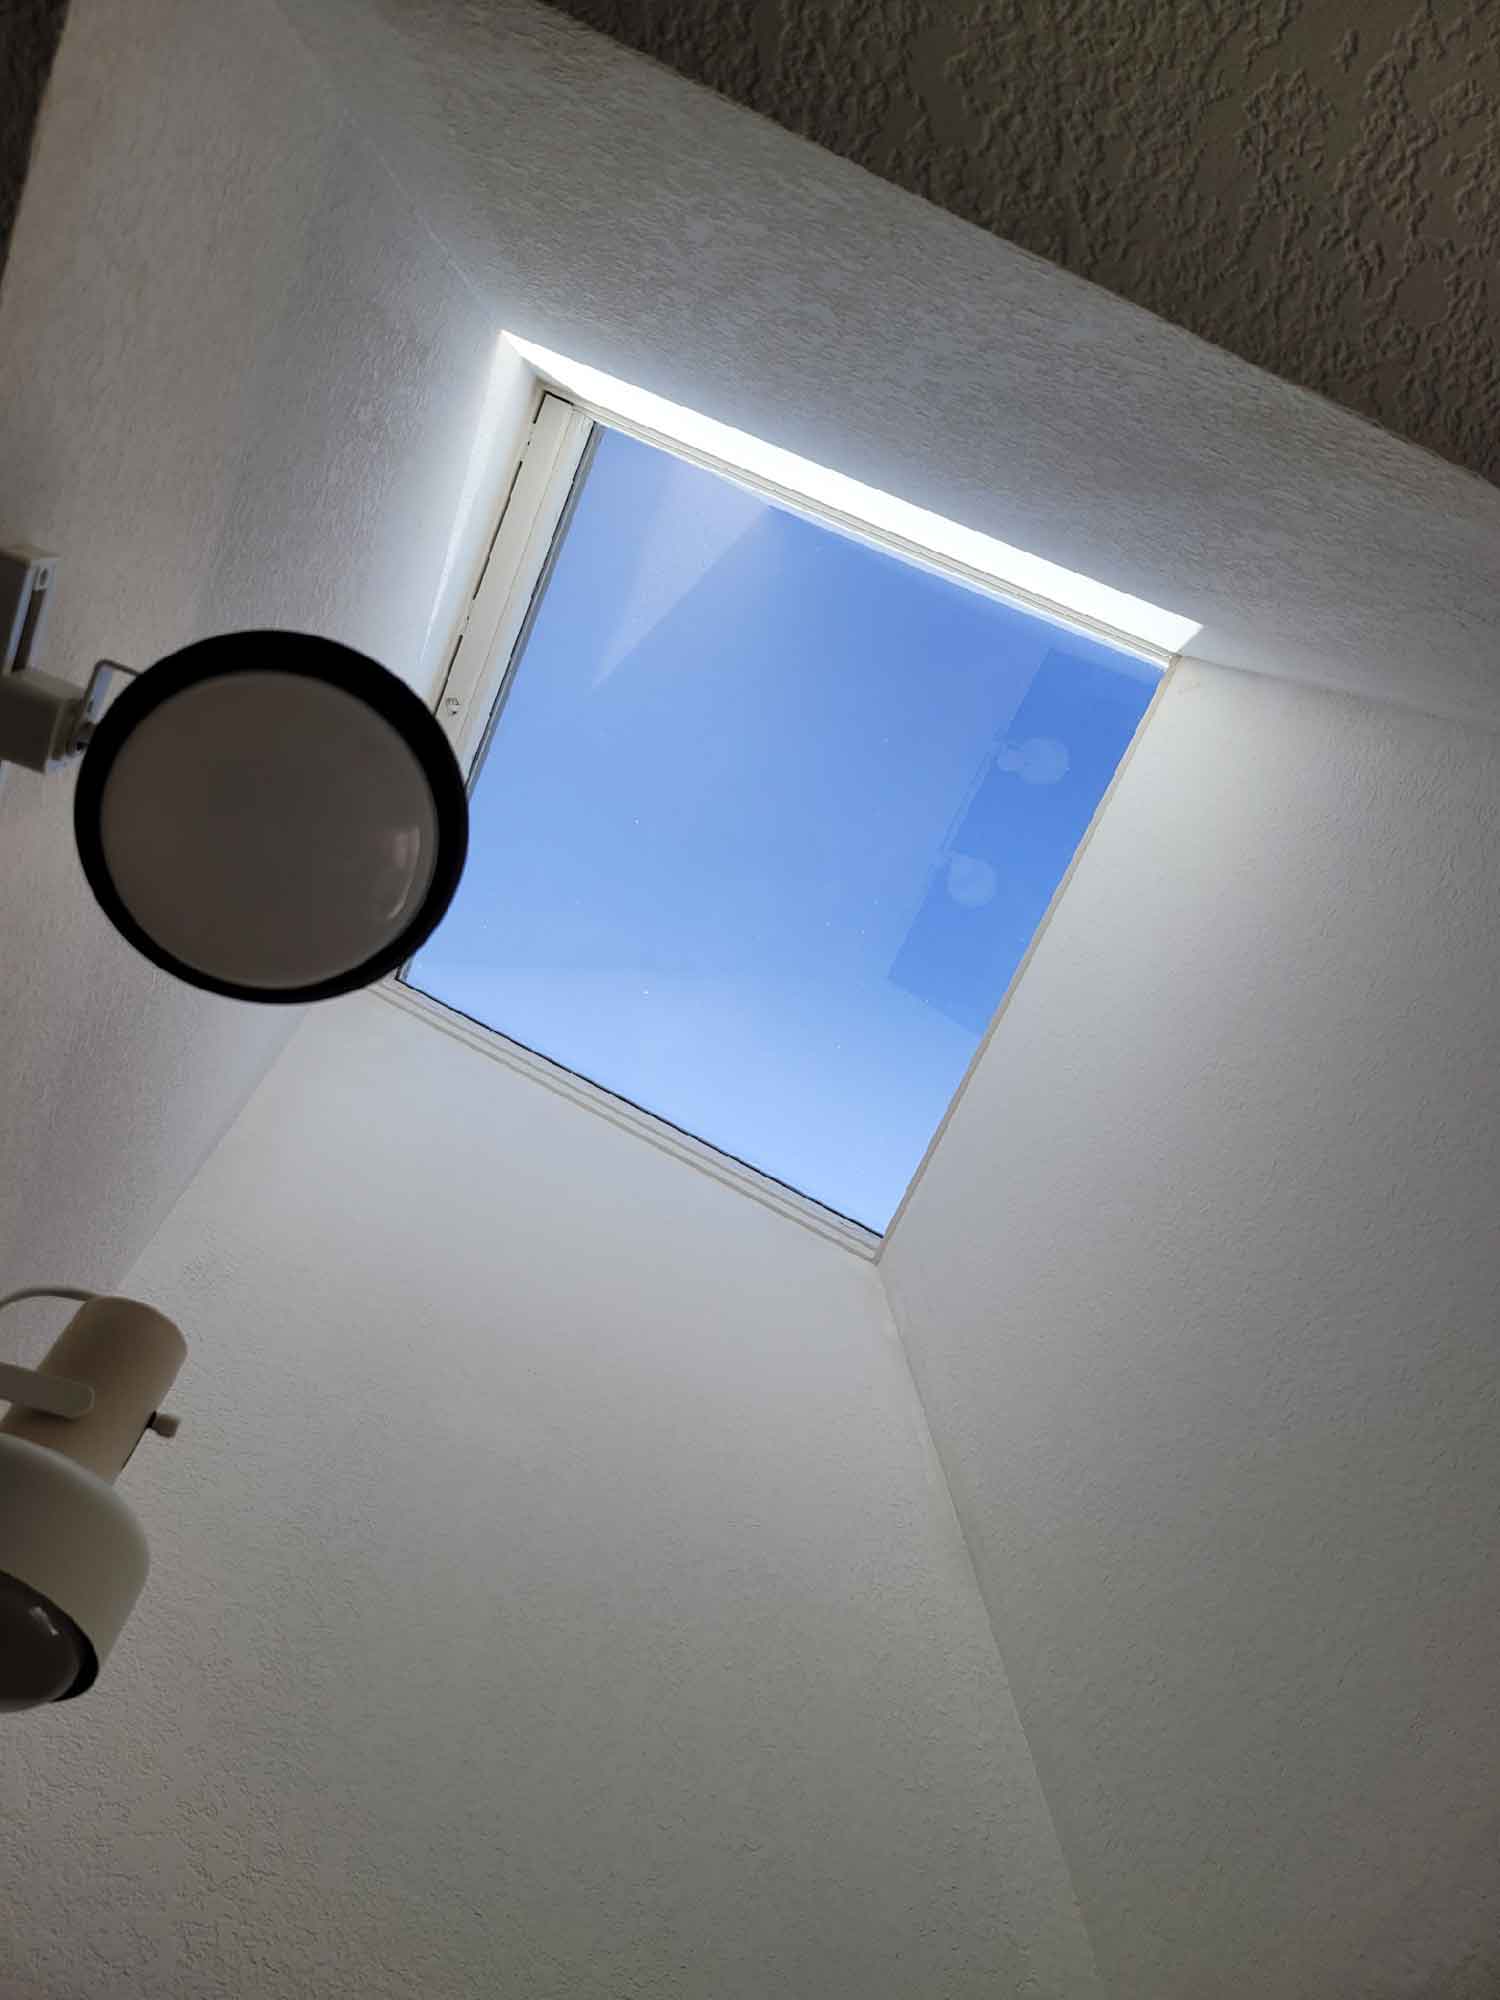 The ClimatePro team installed two window tints on the skylights of this San Carlos, CA, home. Get a free estimate for your home today.